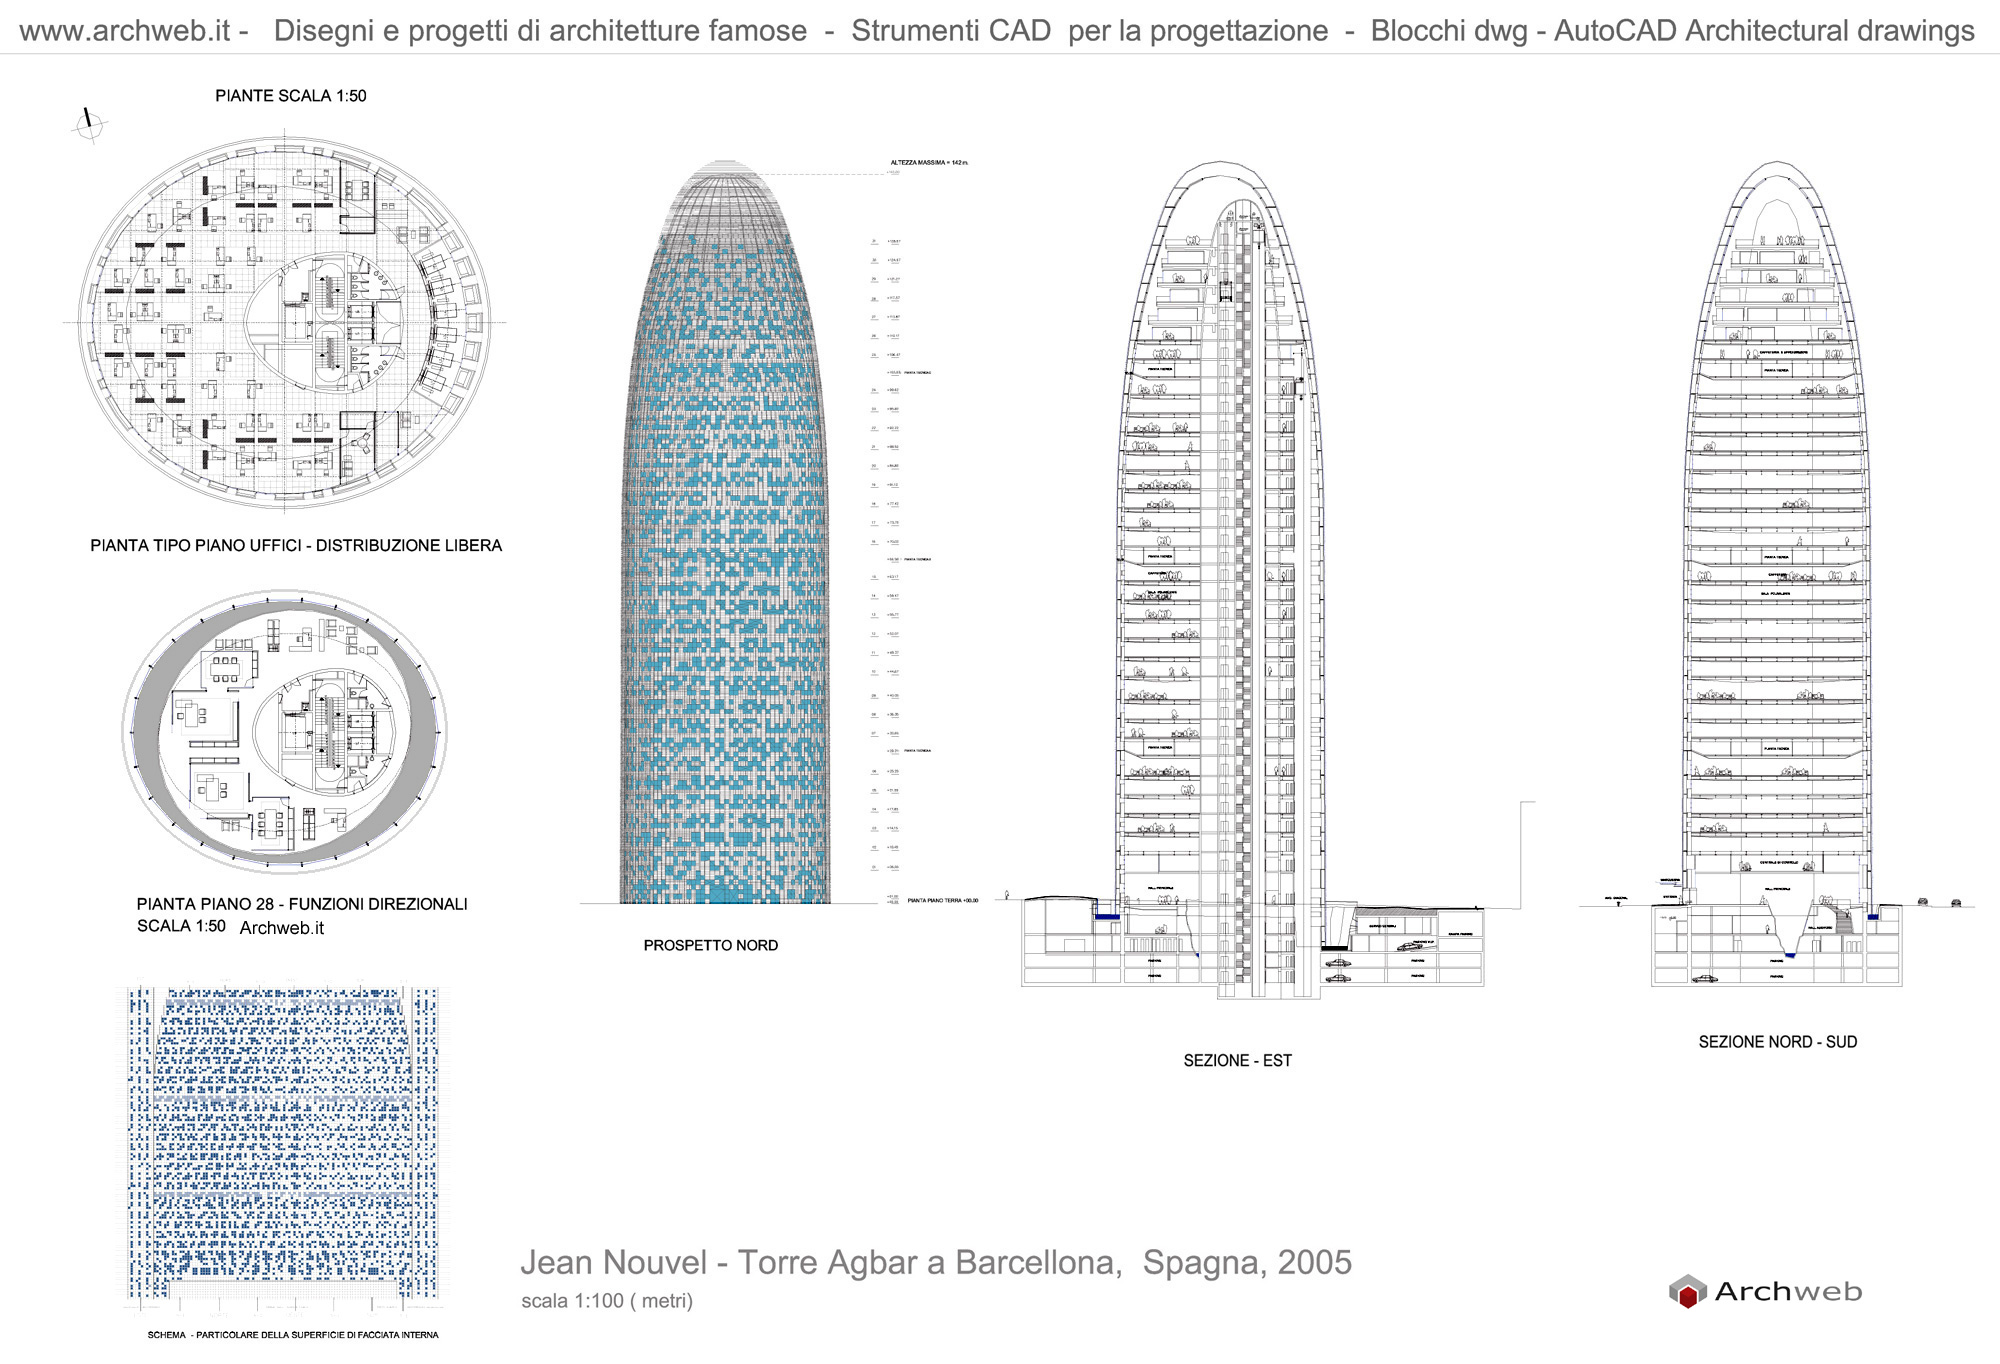 Torre Agbar Barcellona Drawings